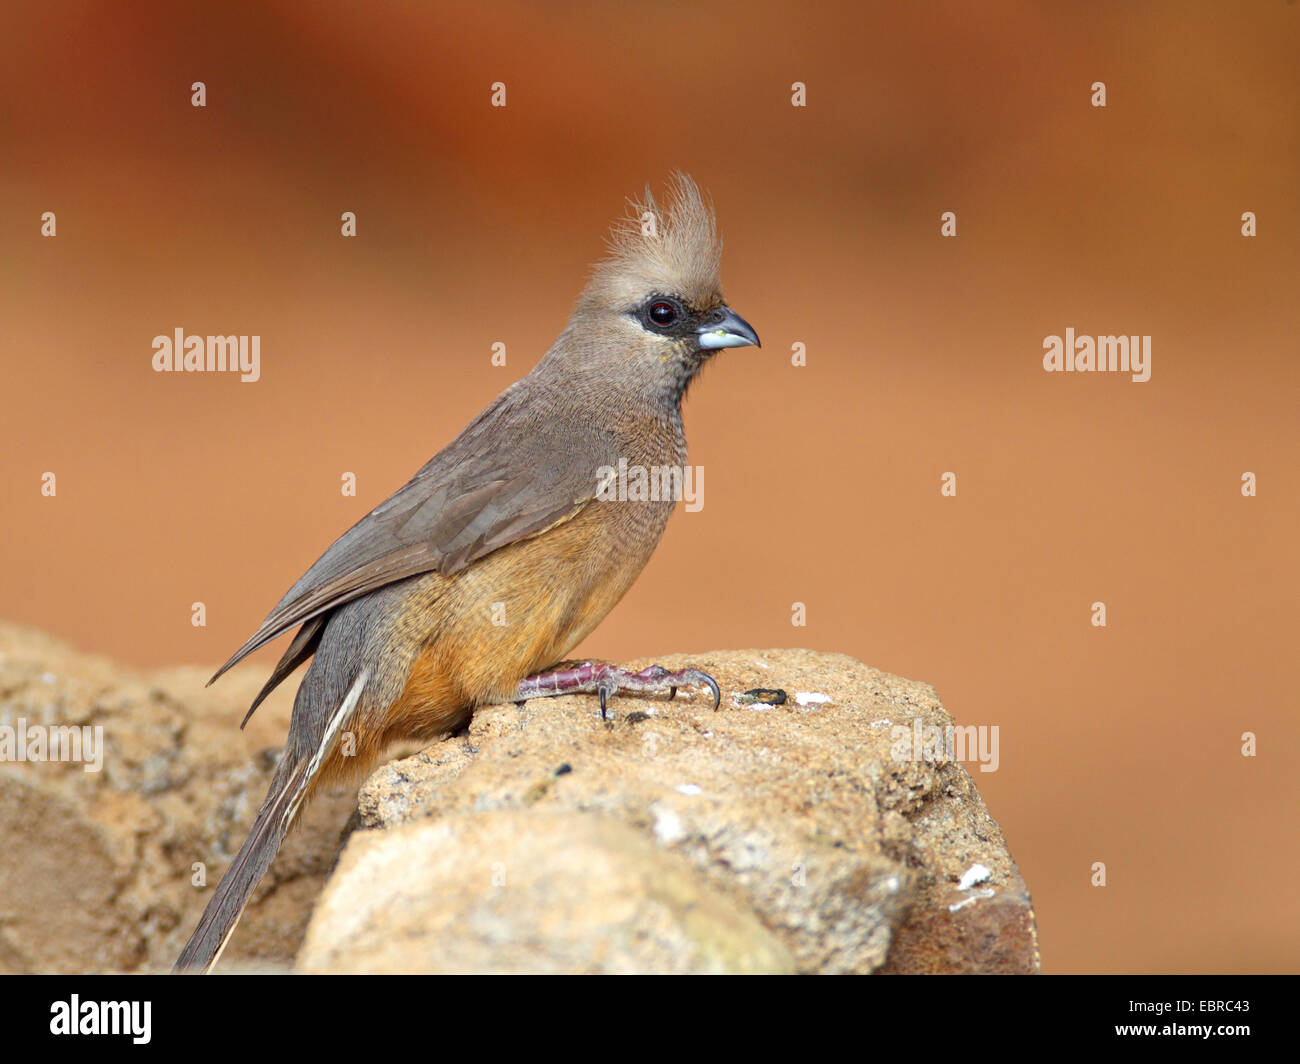 Speckled mousebird (Colius striatus), sitting at a stone, South Africa, North West Province, Barberspan Bird Sanctuary Stock Photo